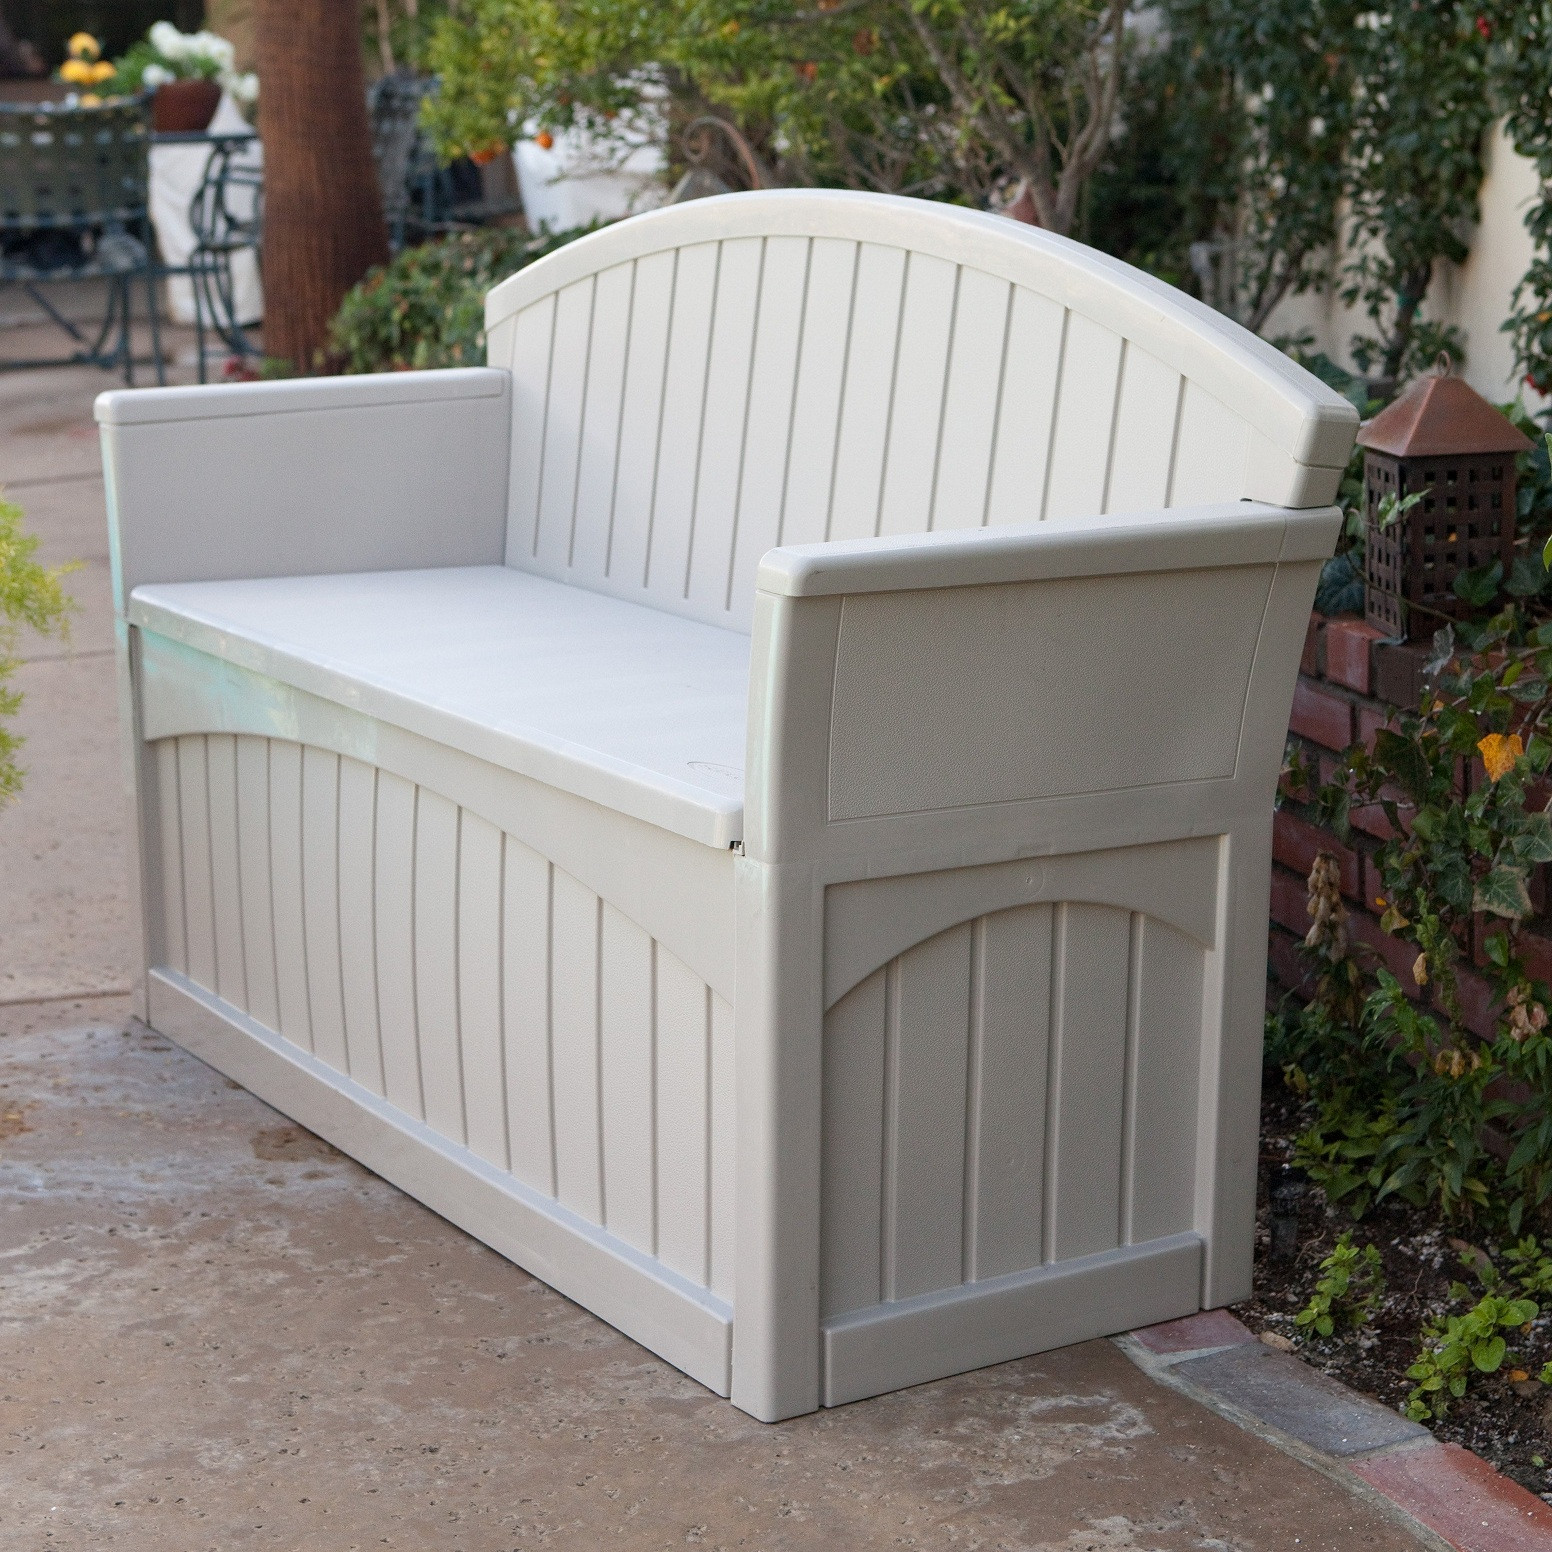 Outdoor Storage Bench Waterproof
 DIY Outdoor Bench With Storage Cushion And Back Curved